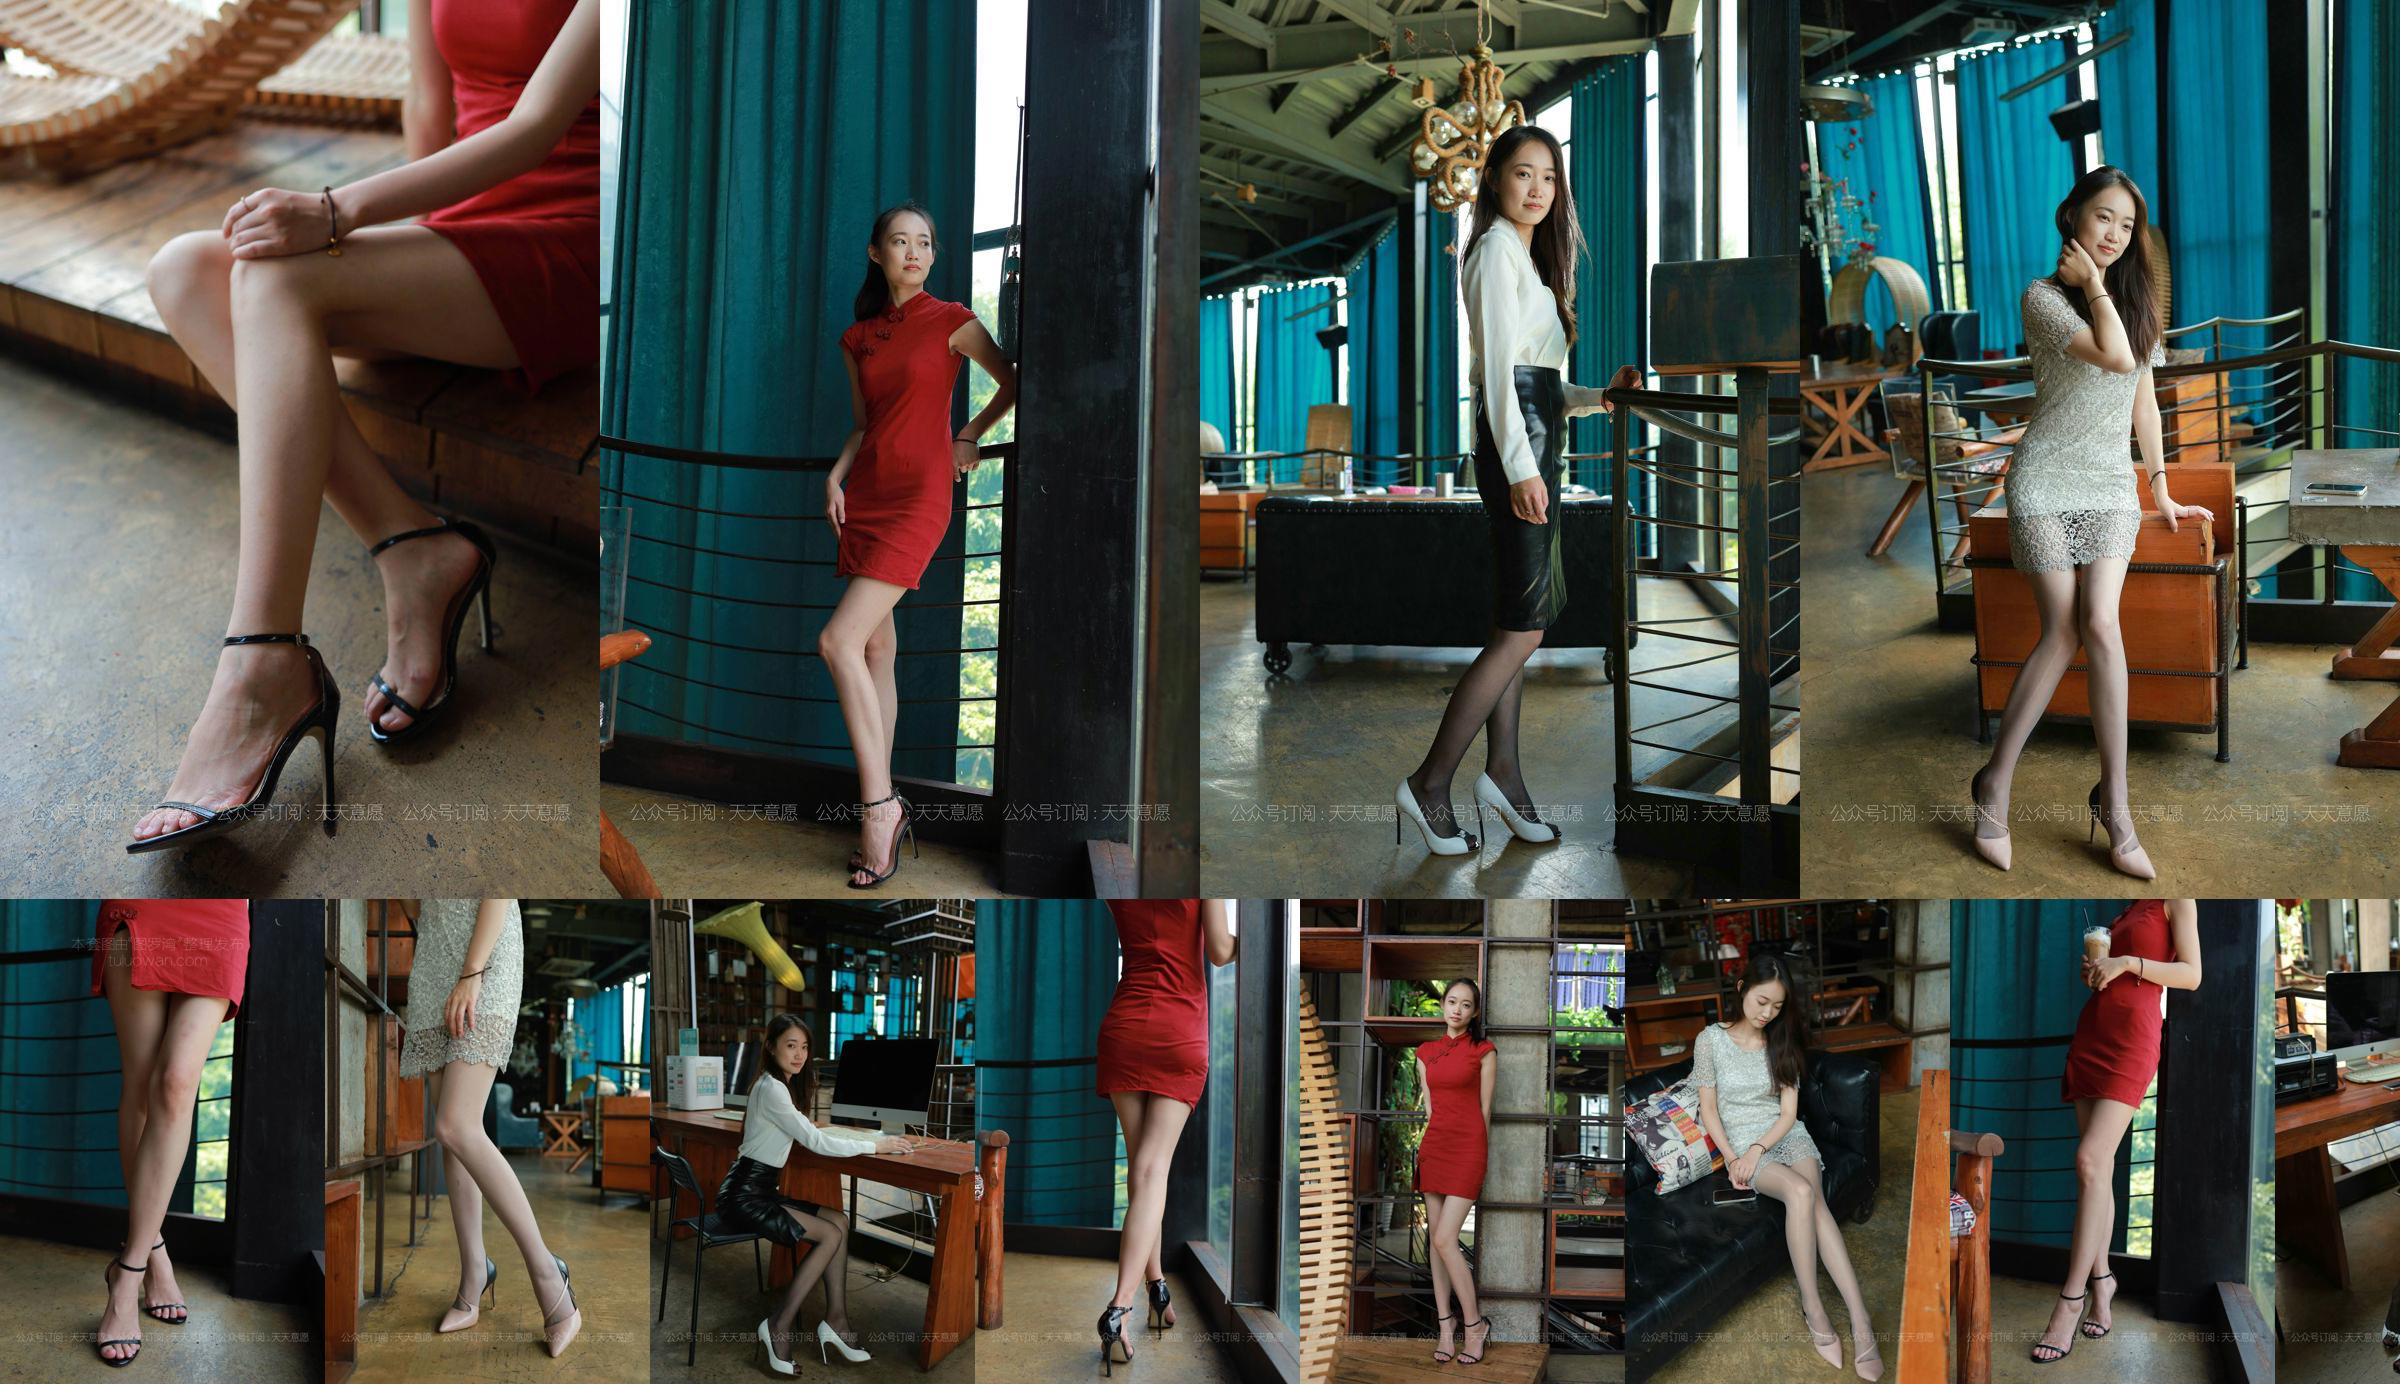 [IESS 奇思趣向] Model: Xiao Gao "Beautiful Legs Since Ancient Times" No.8bb2fe Page 39